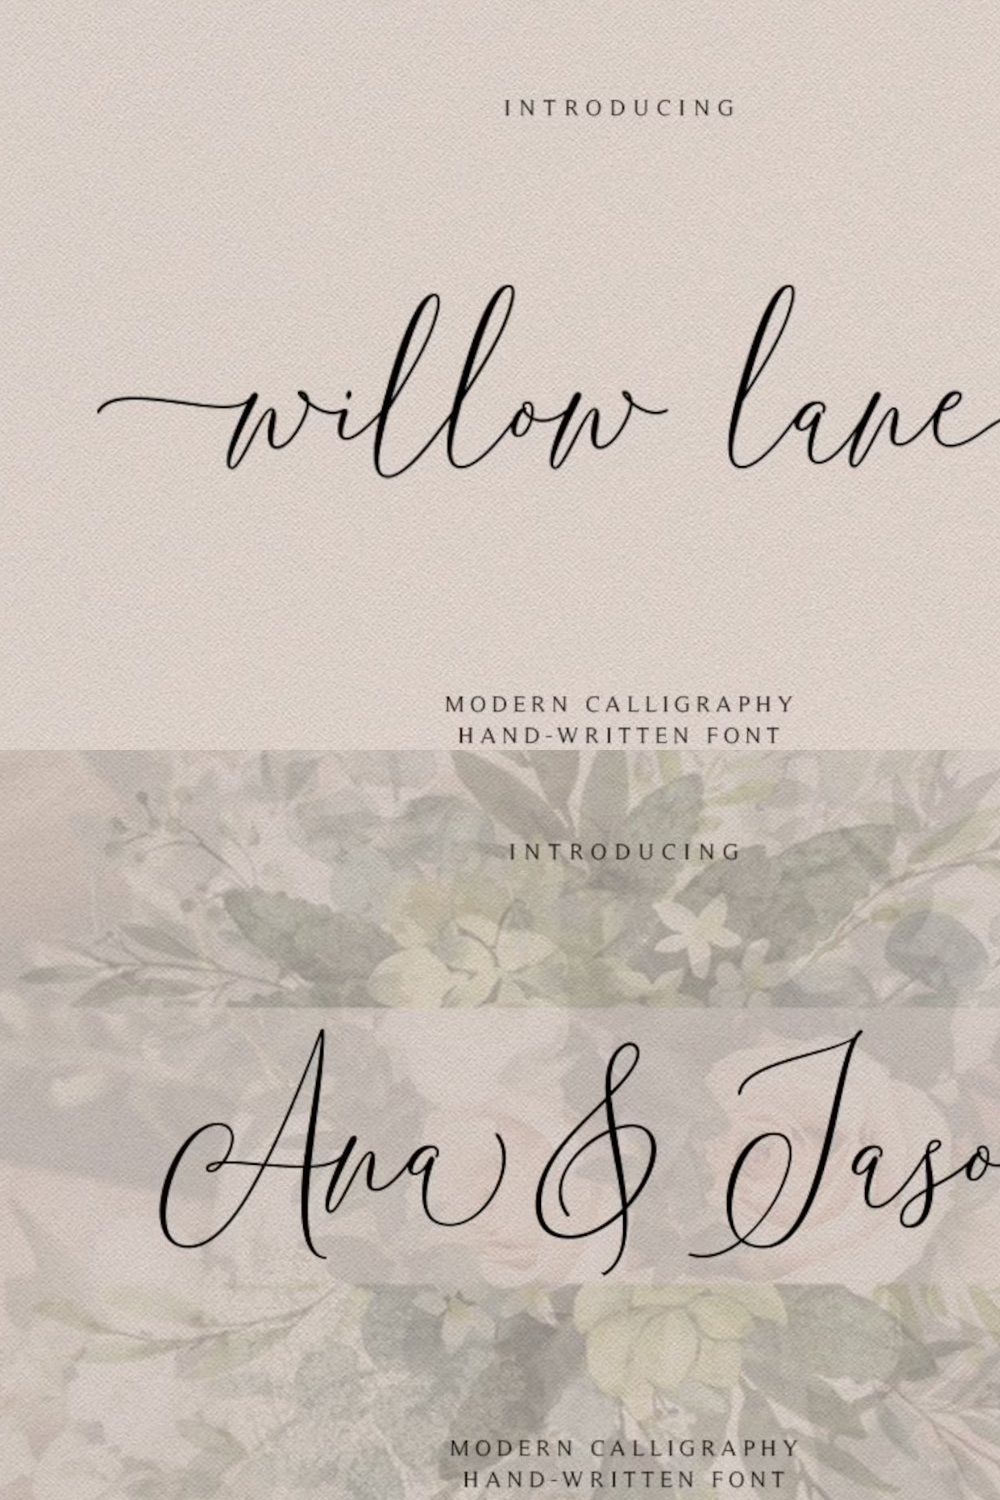 Calligraphy fontWedding font, Modern pinterest preview image.